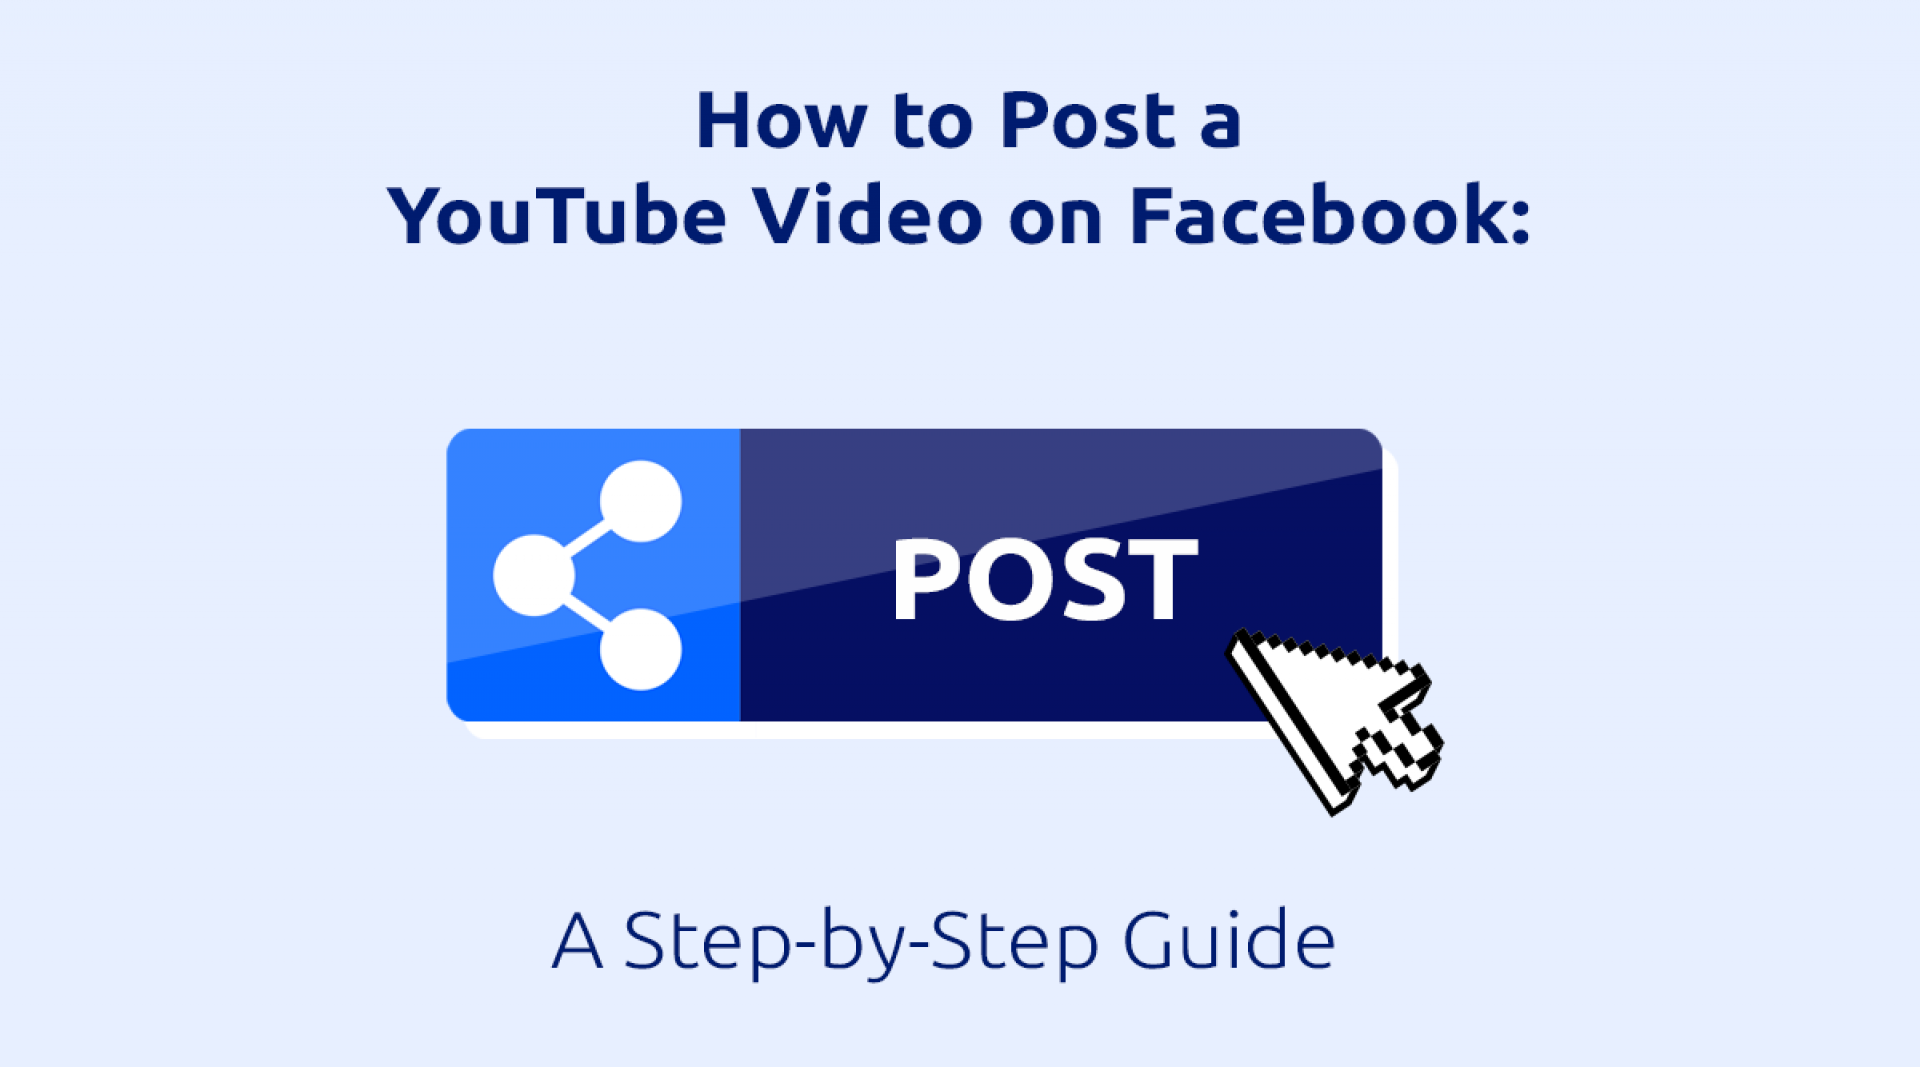 How to Post a YouTube Video on Facebook: A Step-by-Step Guide